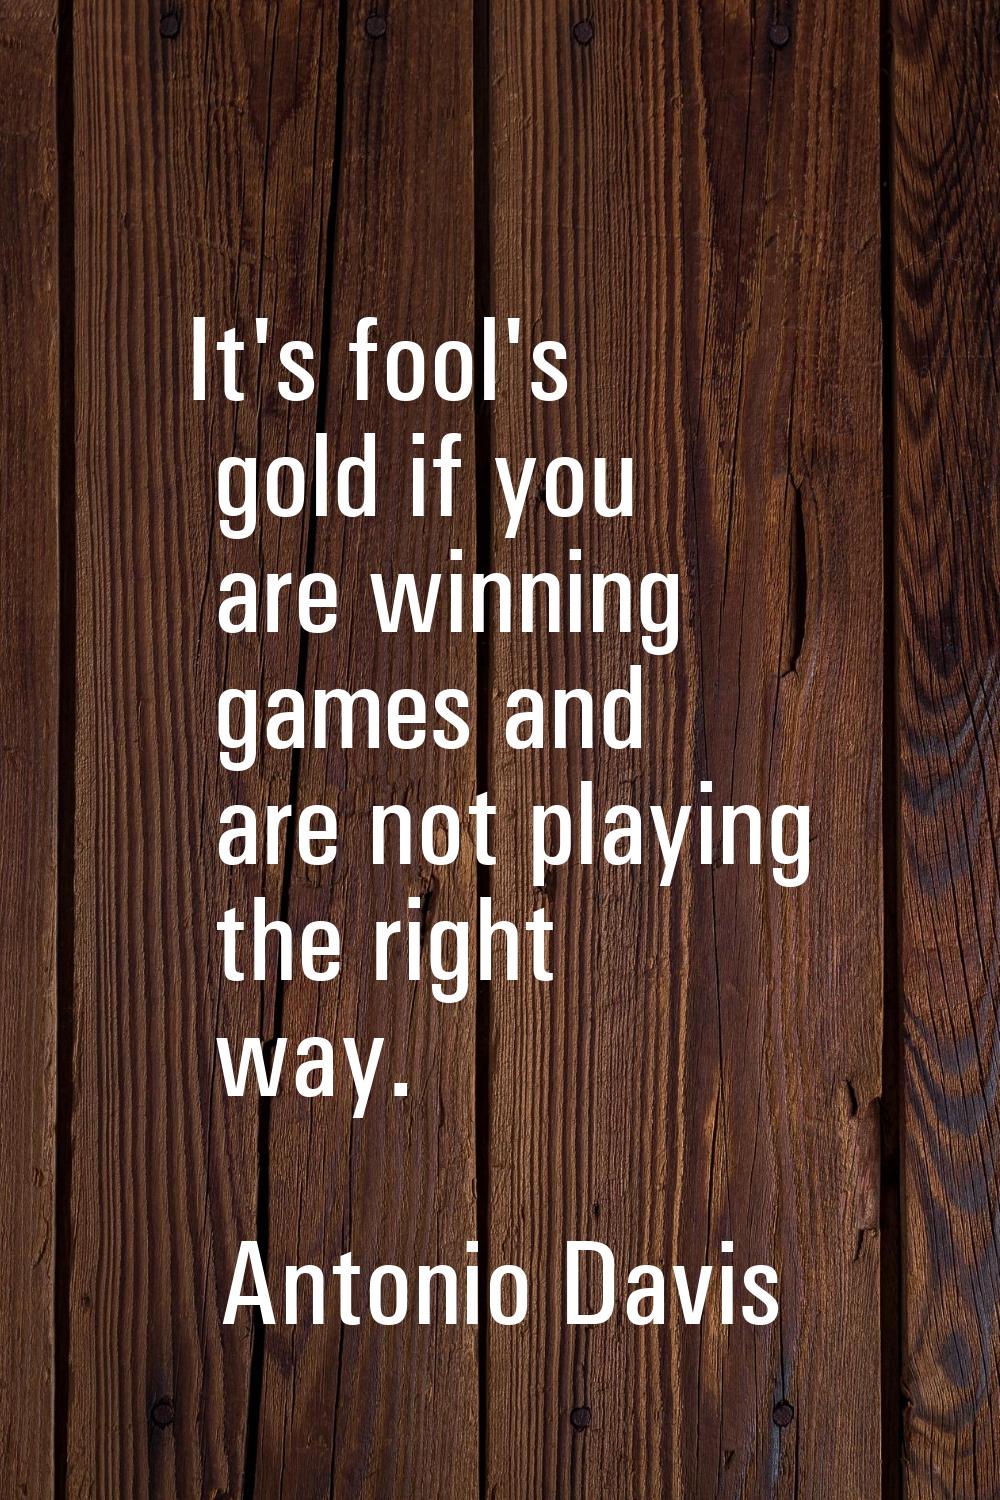 It's fool's gold if you are winning games and are not playing the right way.